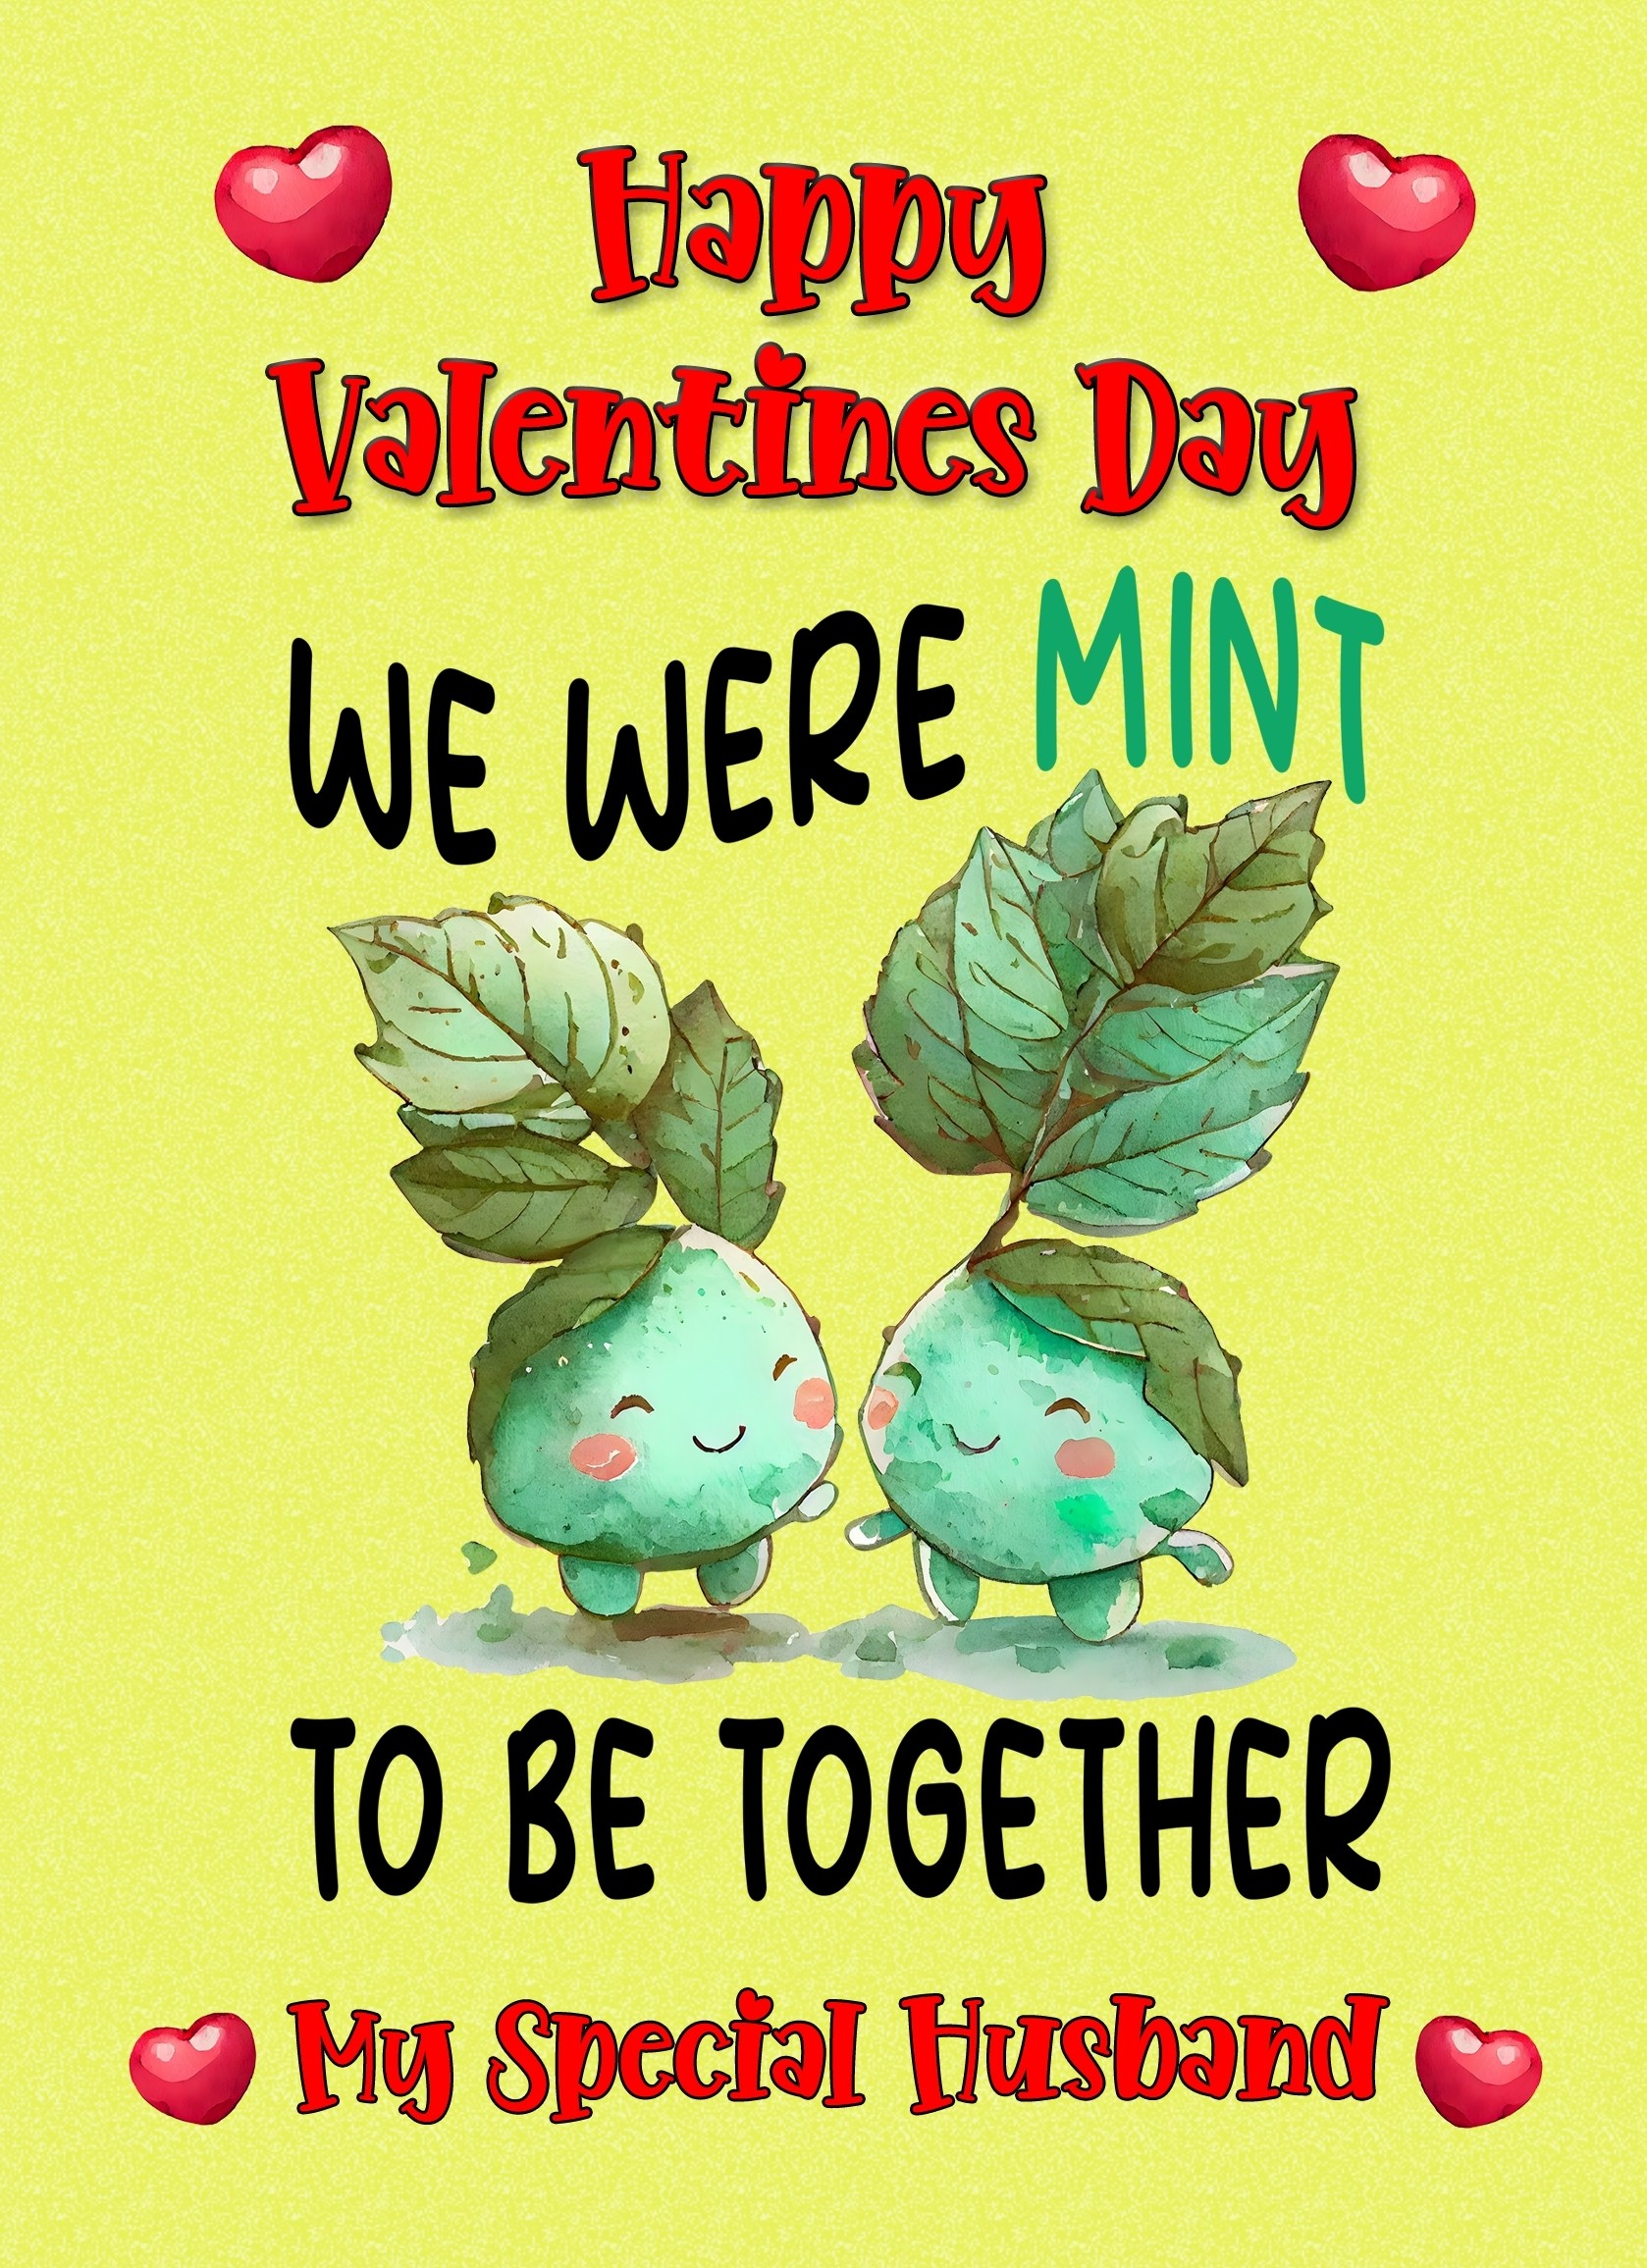 Funny Pun Valentines Day Card for Husband (Mint to Be)